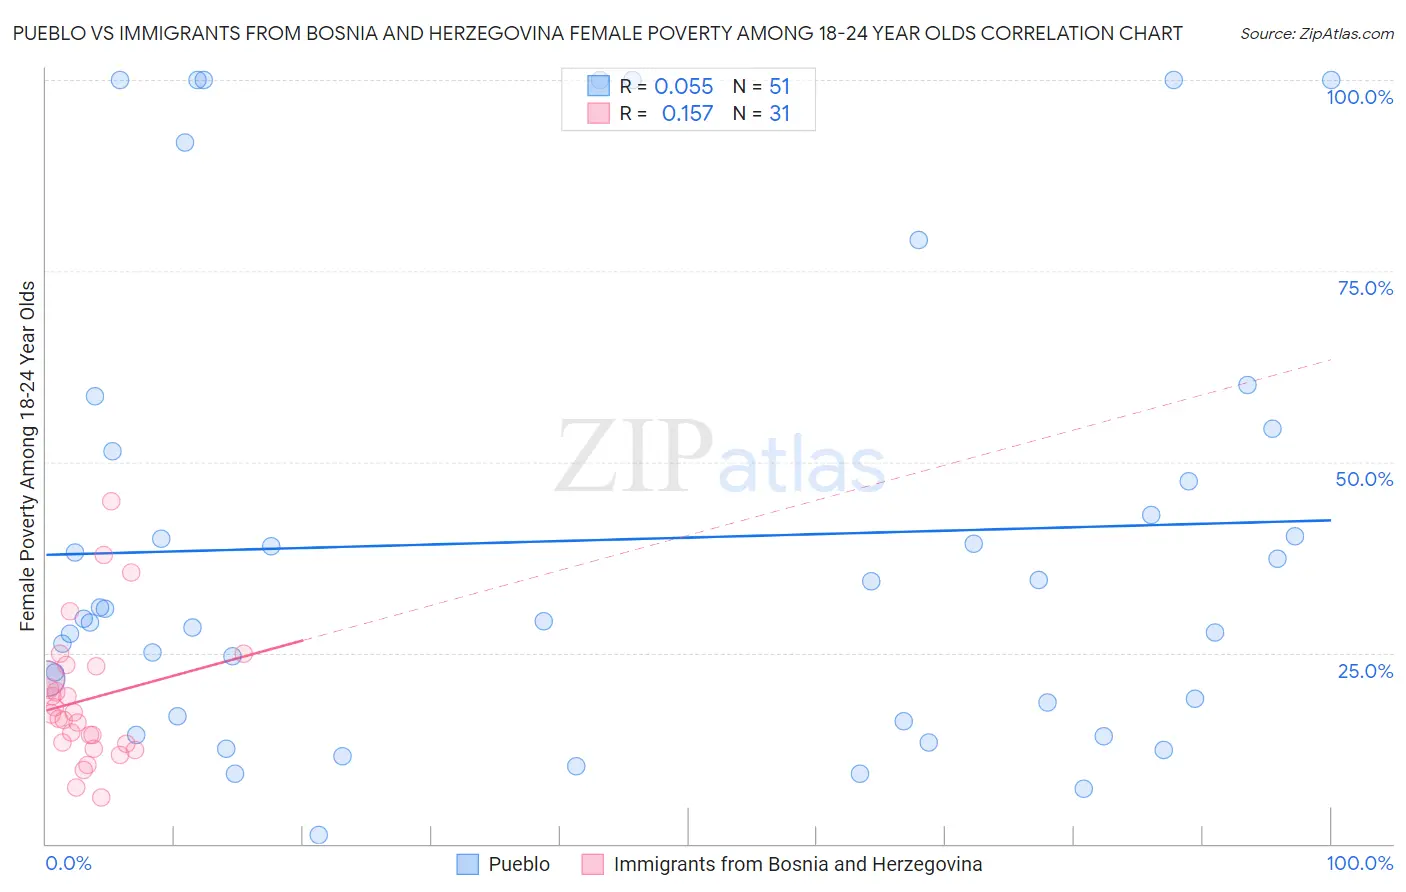 Pueblo vs Immigrants from Bosnia and Herzegovina Female Poverty Among 18-24 Year Olds